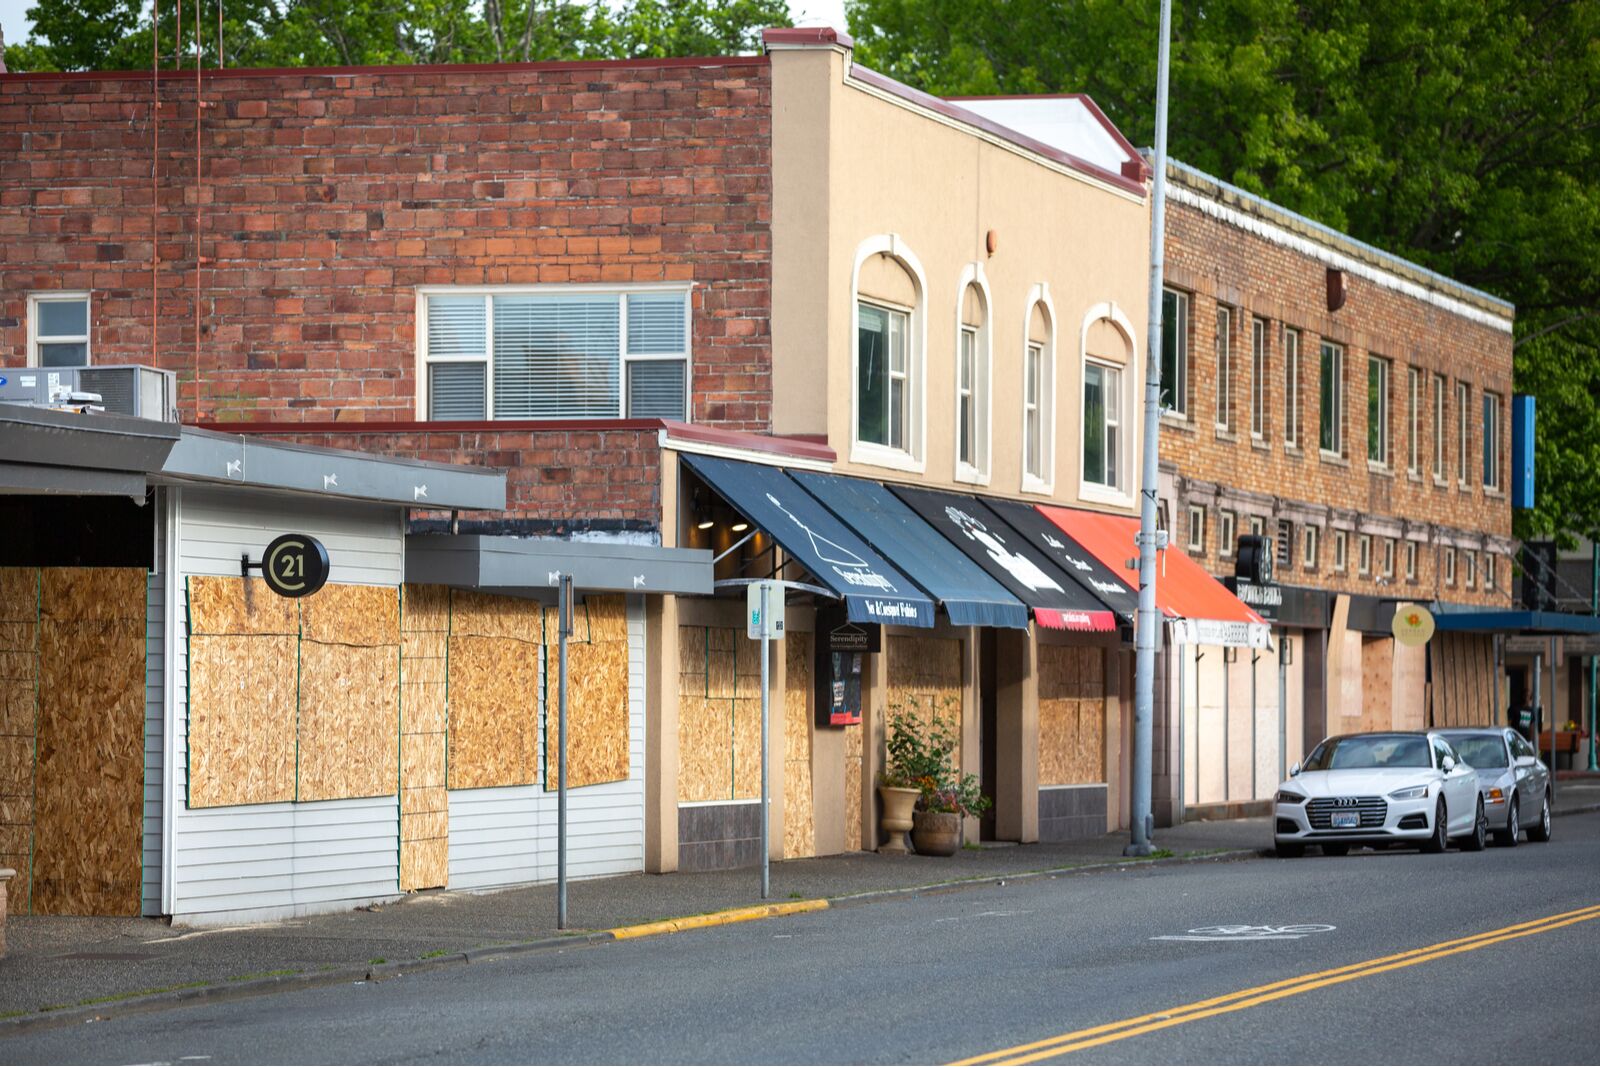 Permanently closed businesses may become a more common sight in your favorite mountain towns